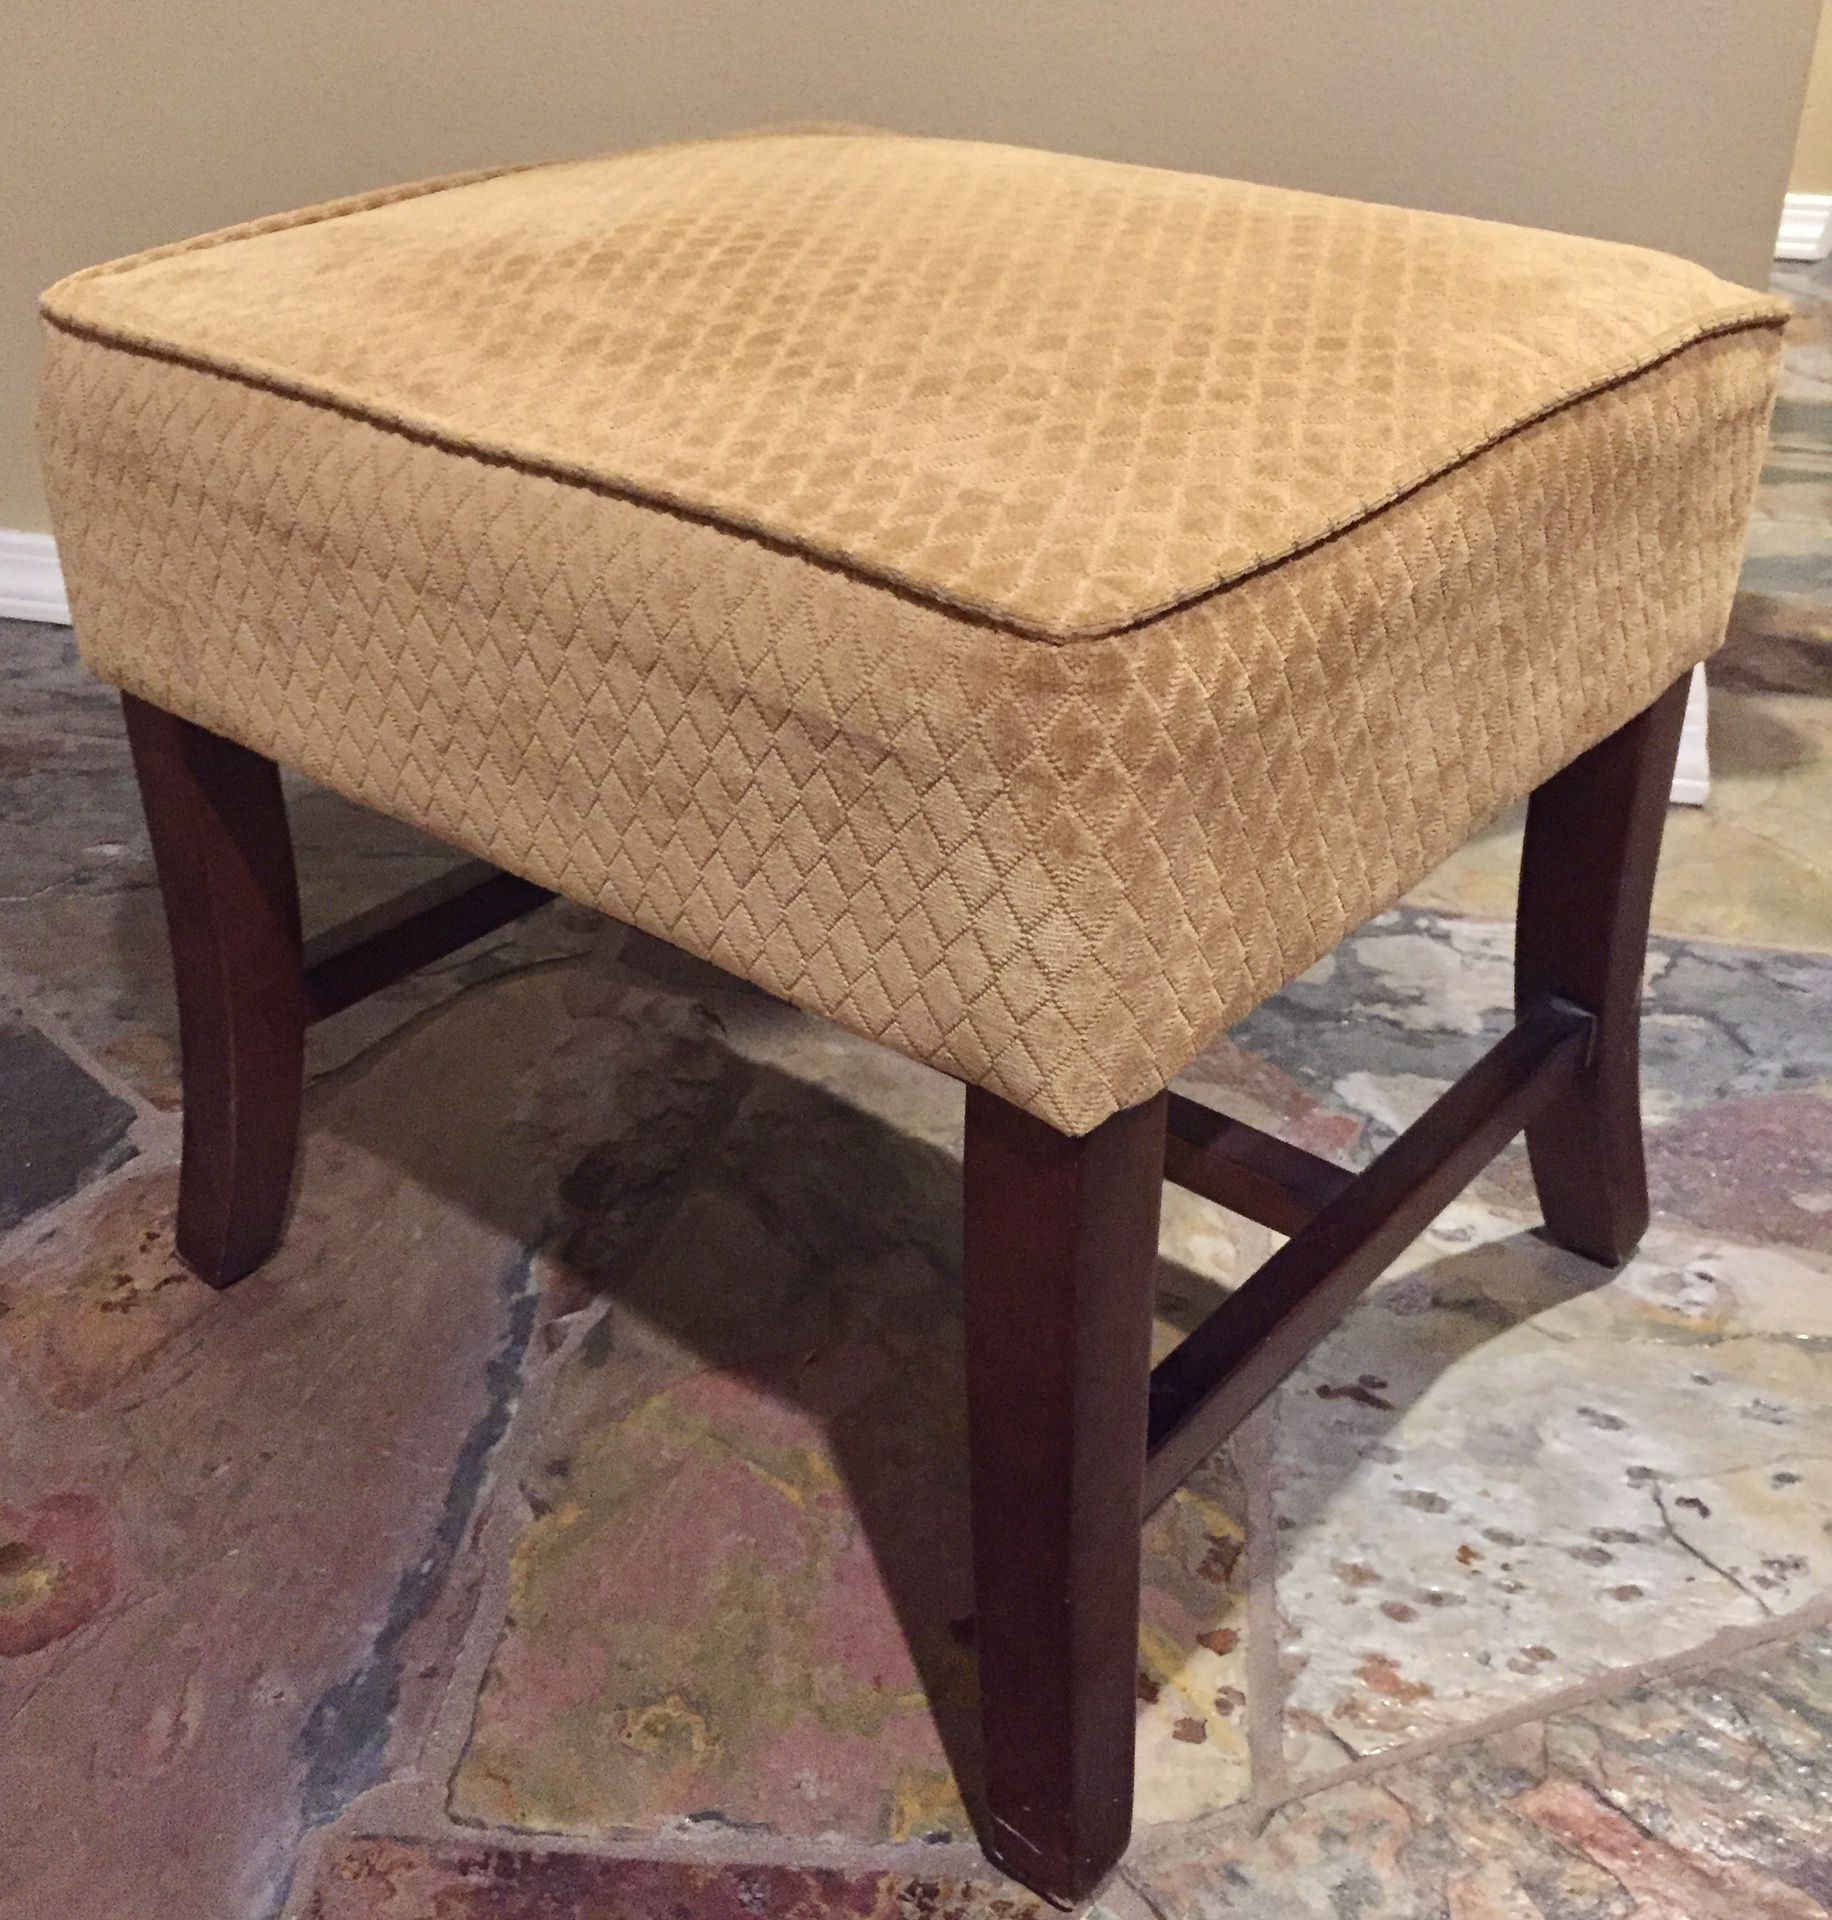 OTTOMAN - (Excellent Condition, Perfect Beige/Gold Upholstery,  Dark Wood)